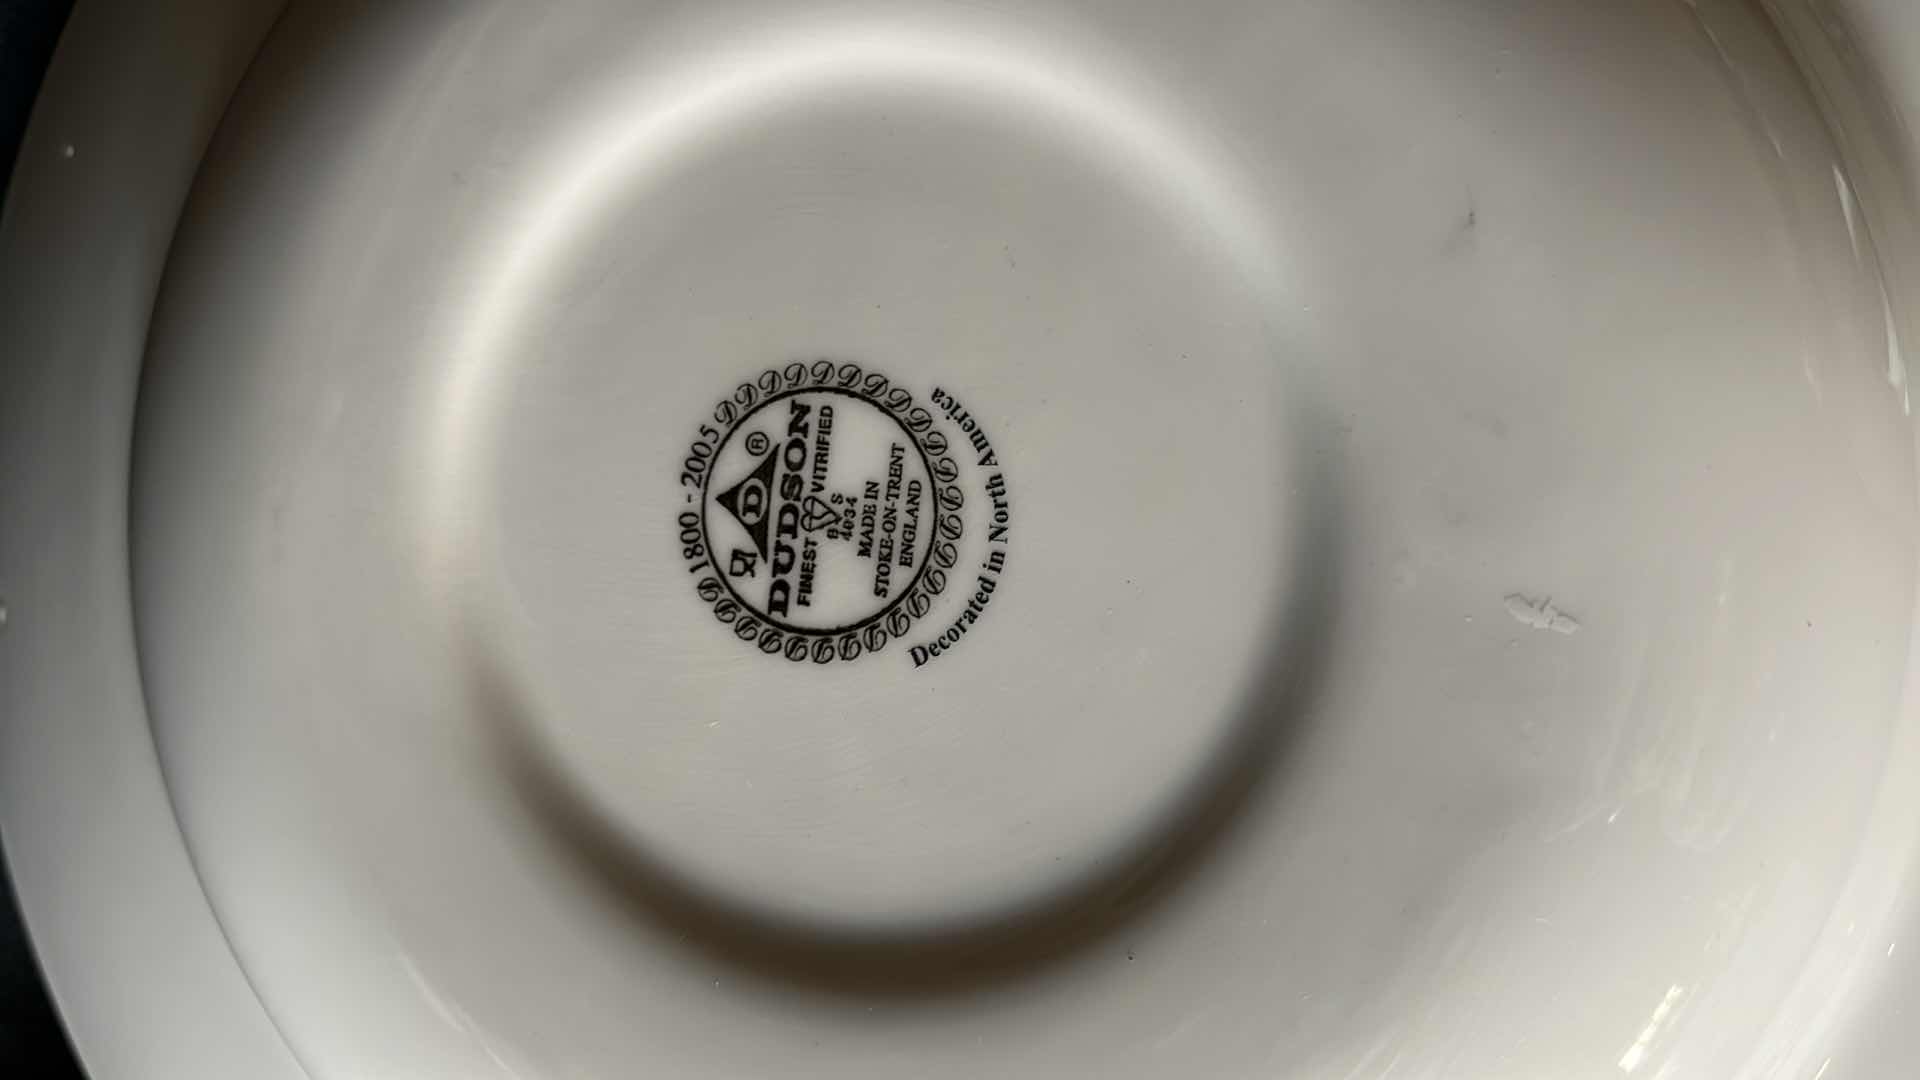 Photo 6 of DUDSON FINEST VOODOO SERVING BOWLS AND SERVING PLATES (SETS OF 4)